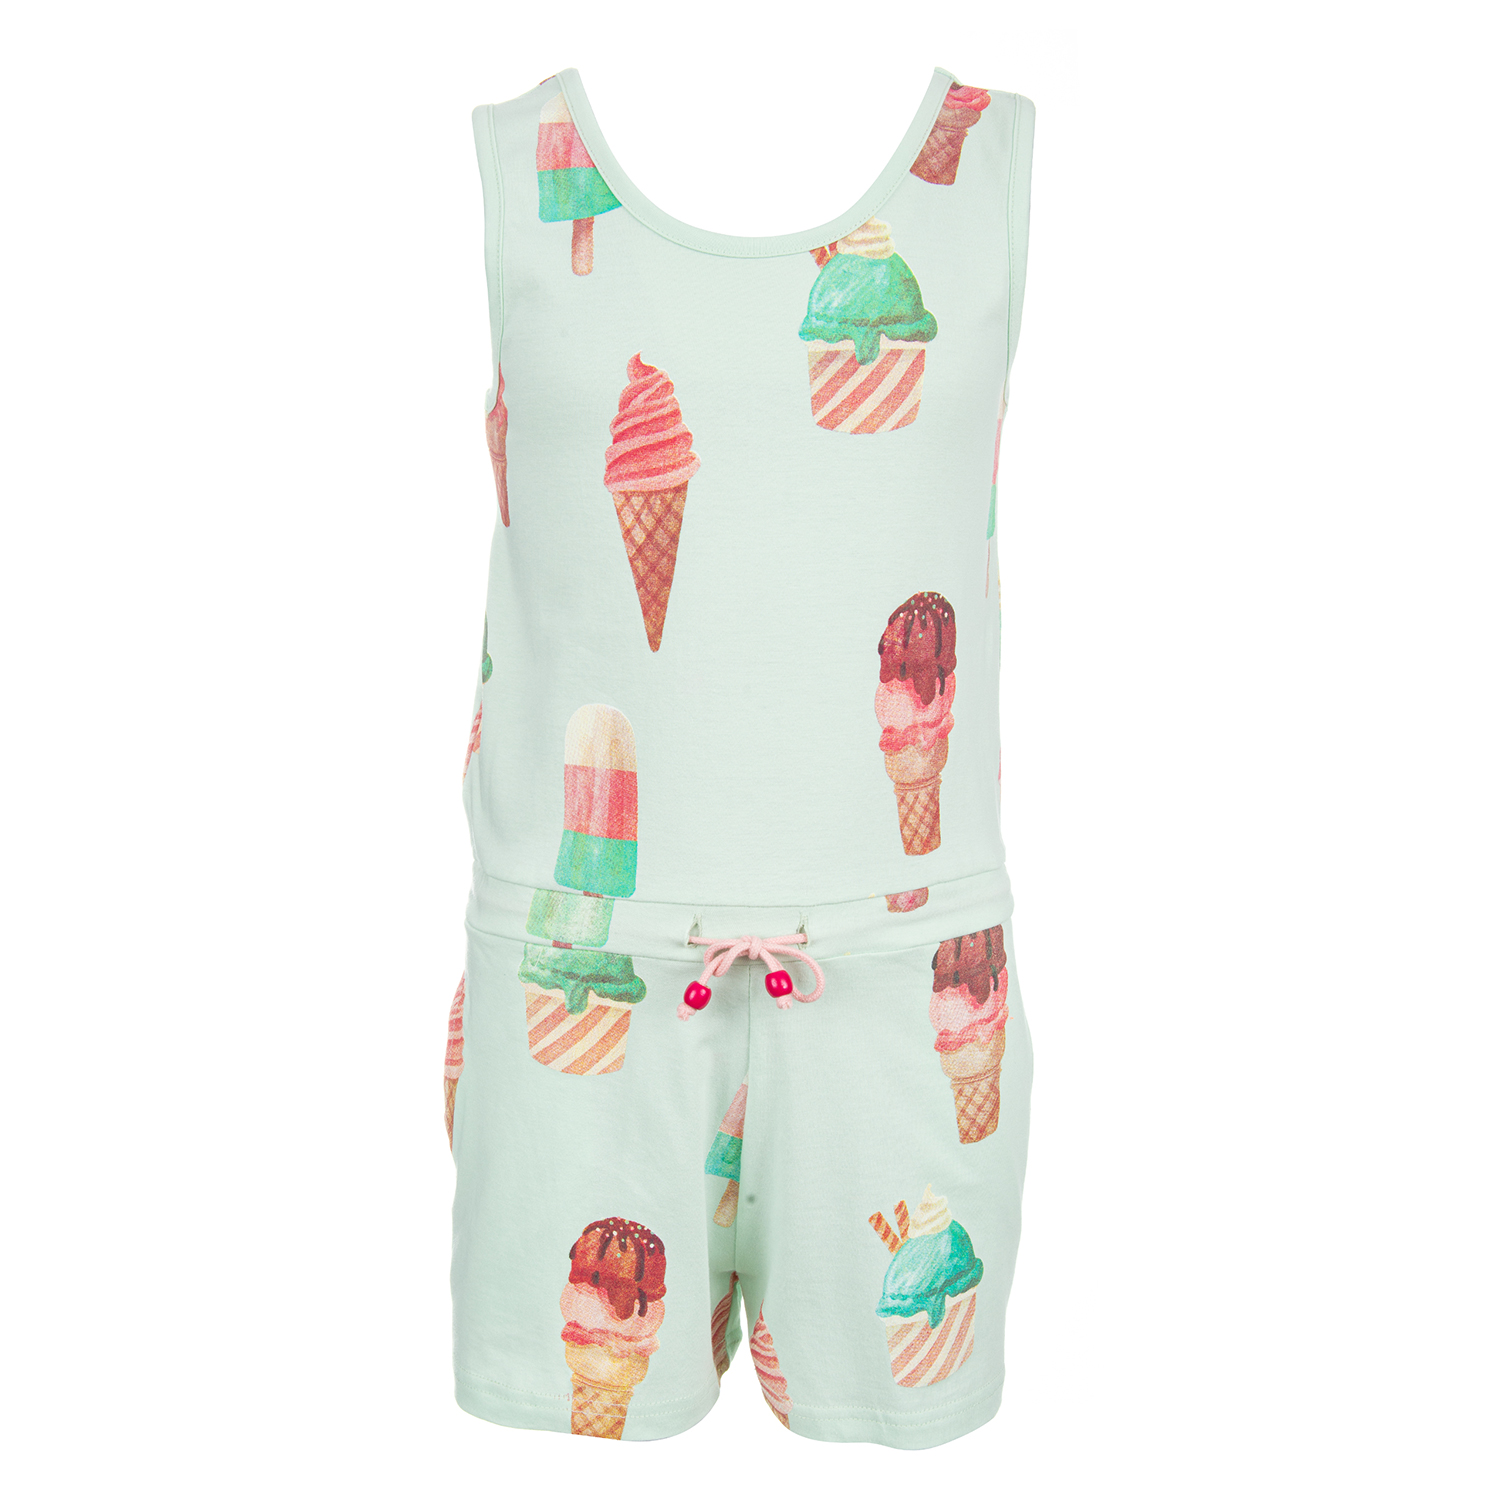 Loulou - ICE PATTERN mint